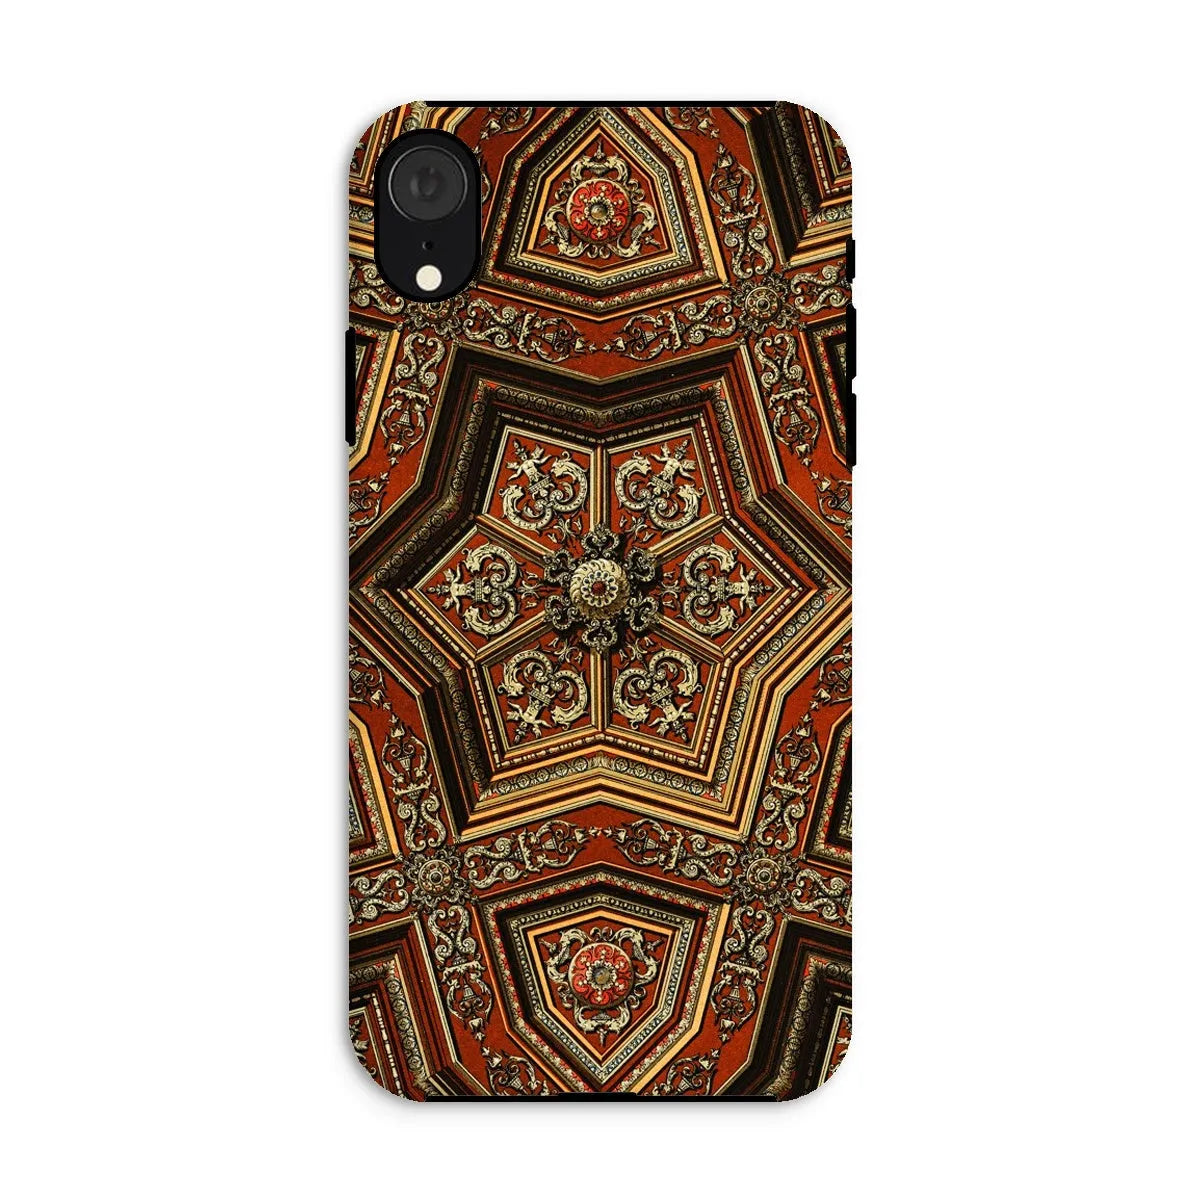 Renaissance Pattern By Auguste Racinet Tough Phone Case - Iphone Xr / Gloss - Mobile Phone Cases - Aesthetic Art